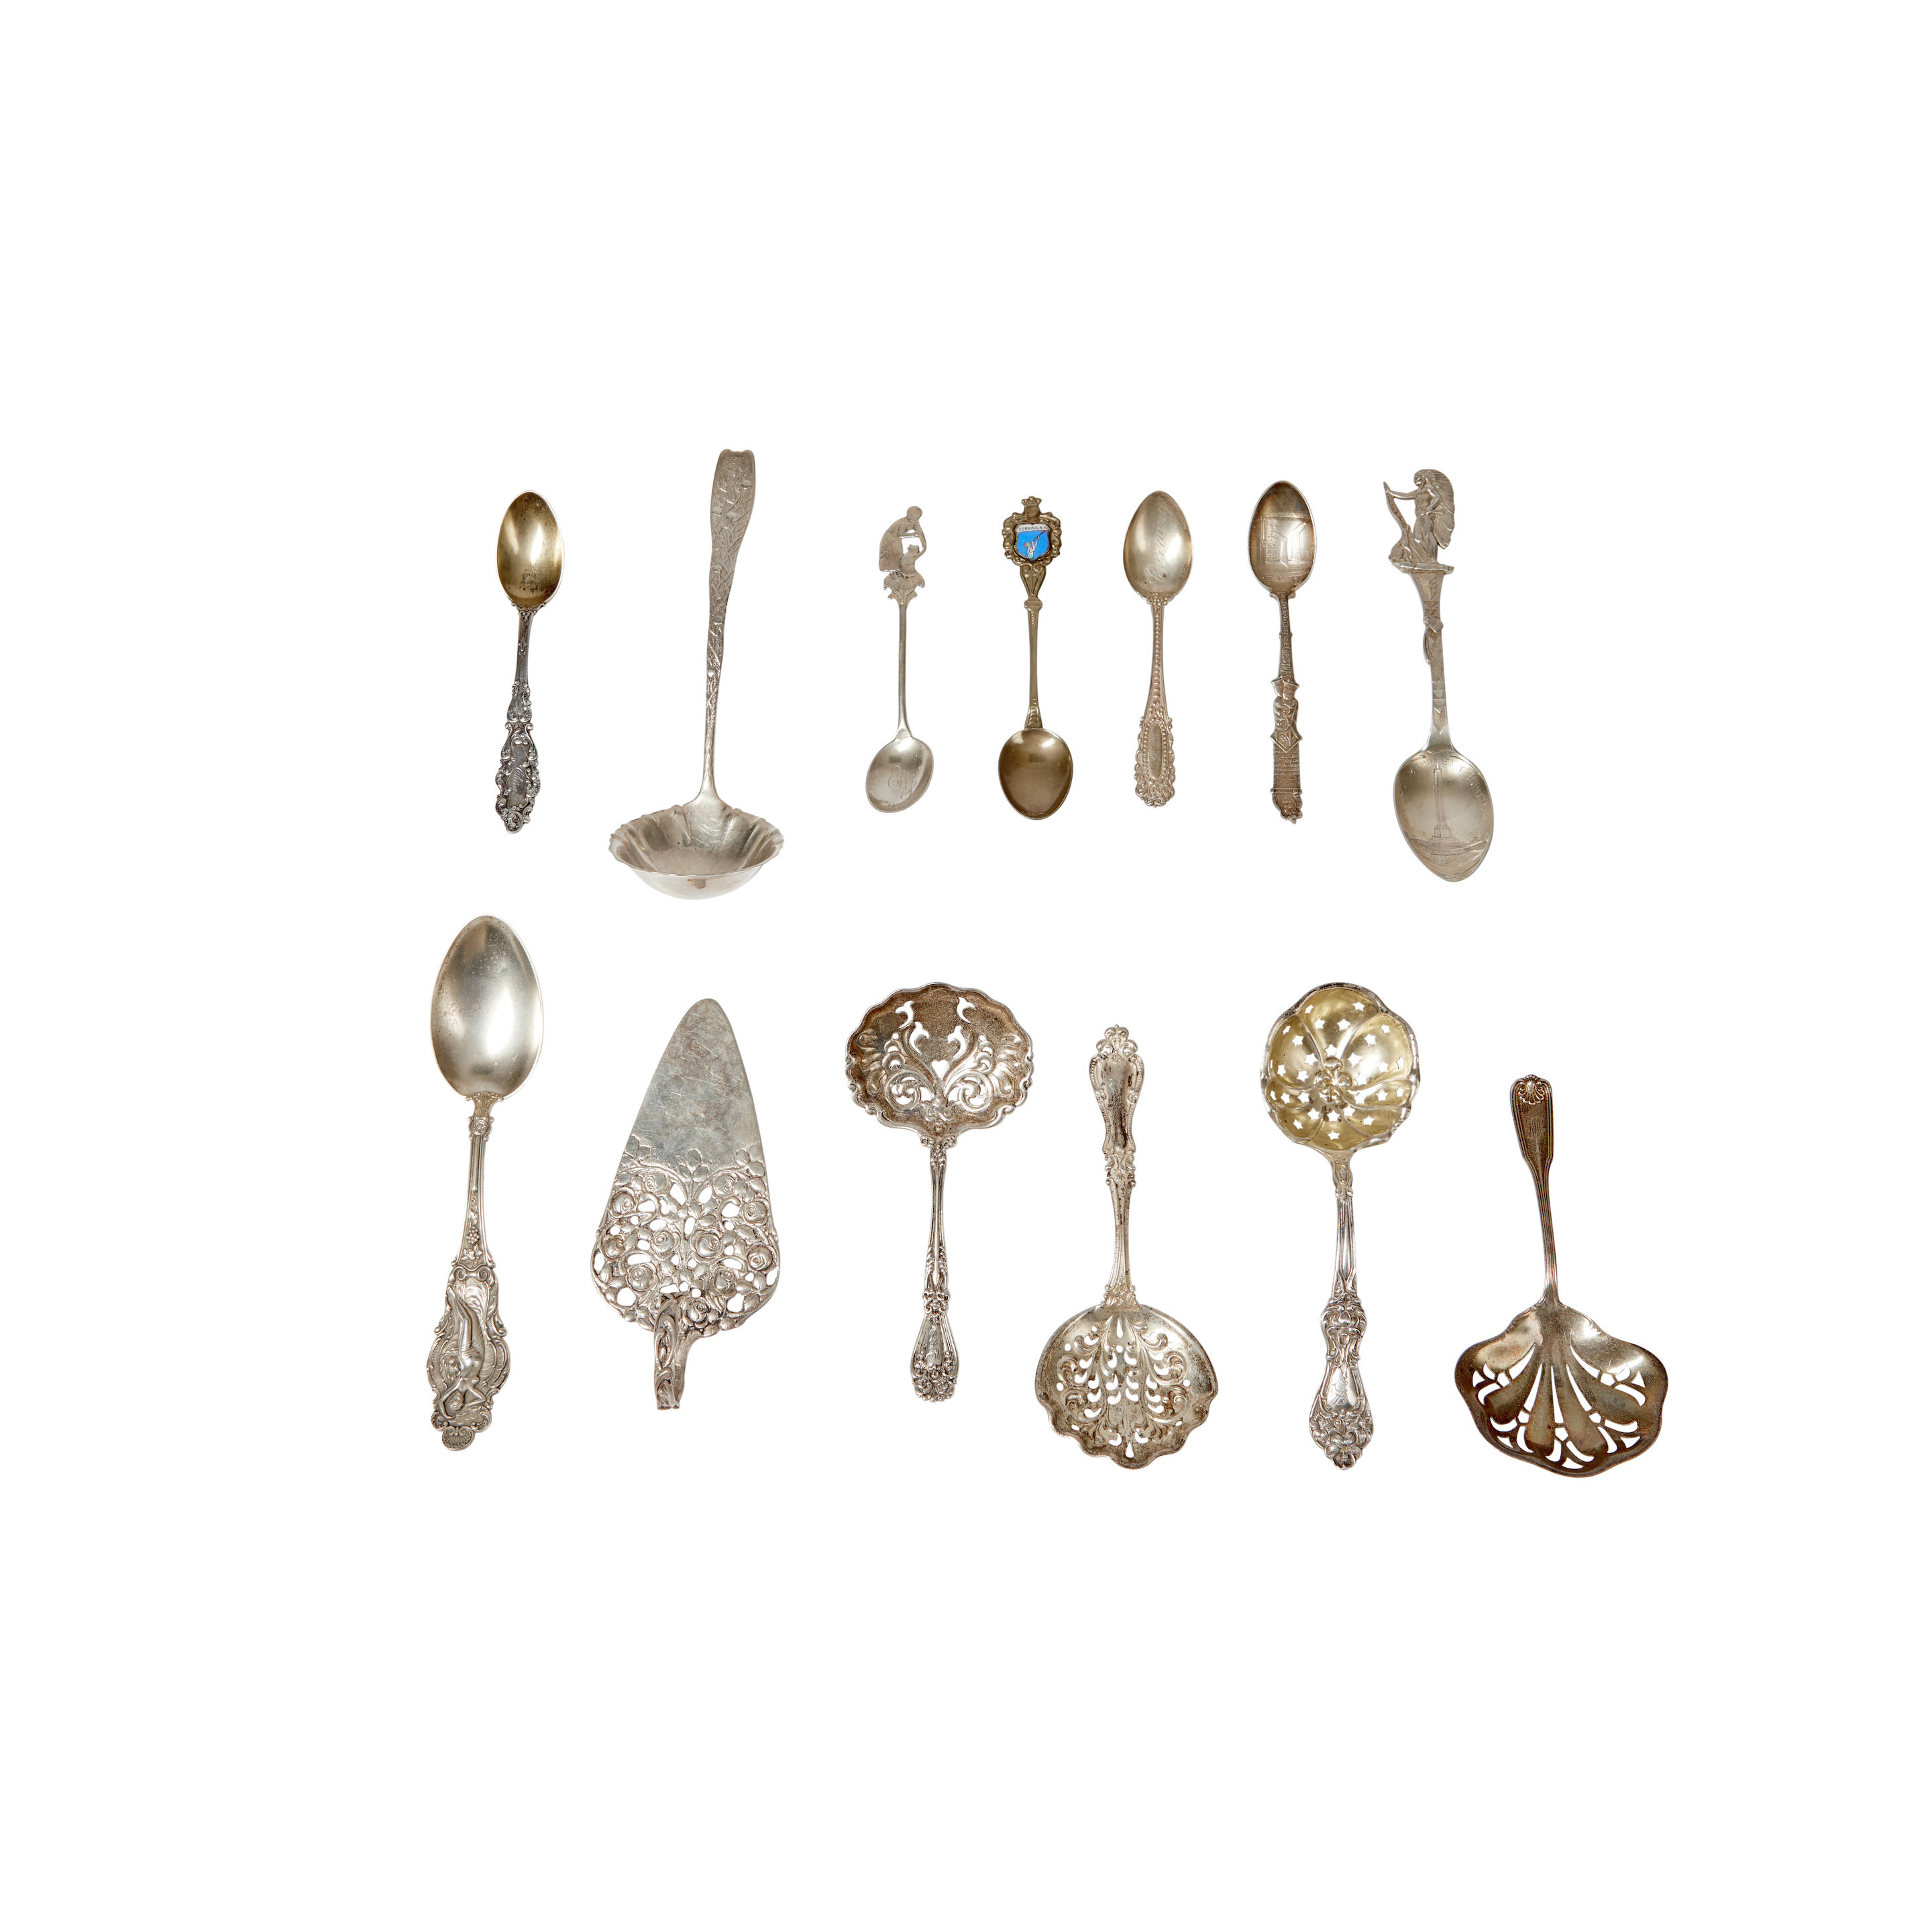 GROUP OF STERLING SILVER AND SILVER-PLATED